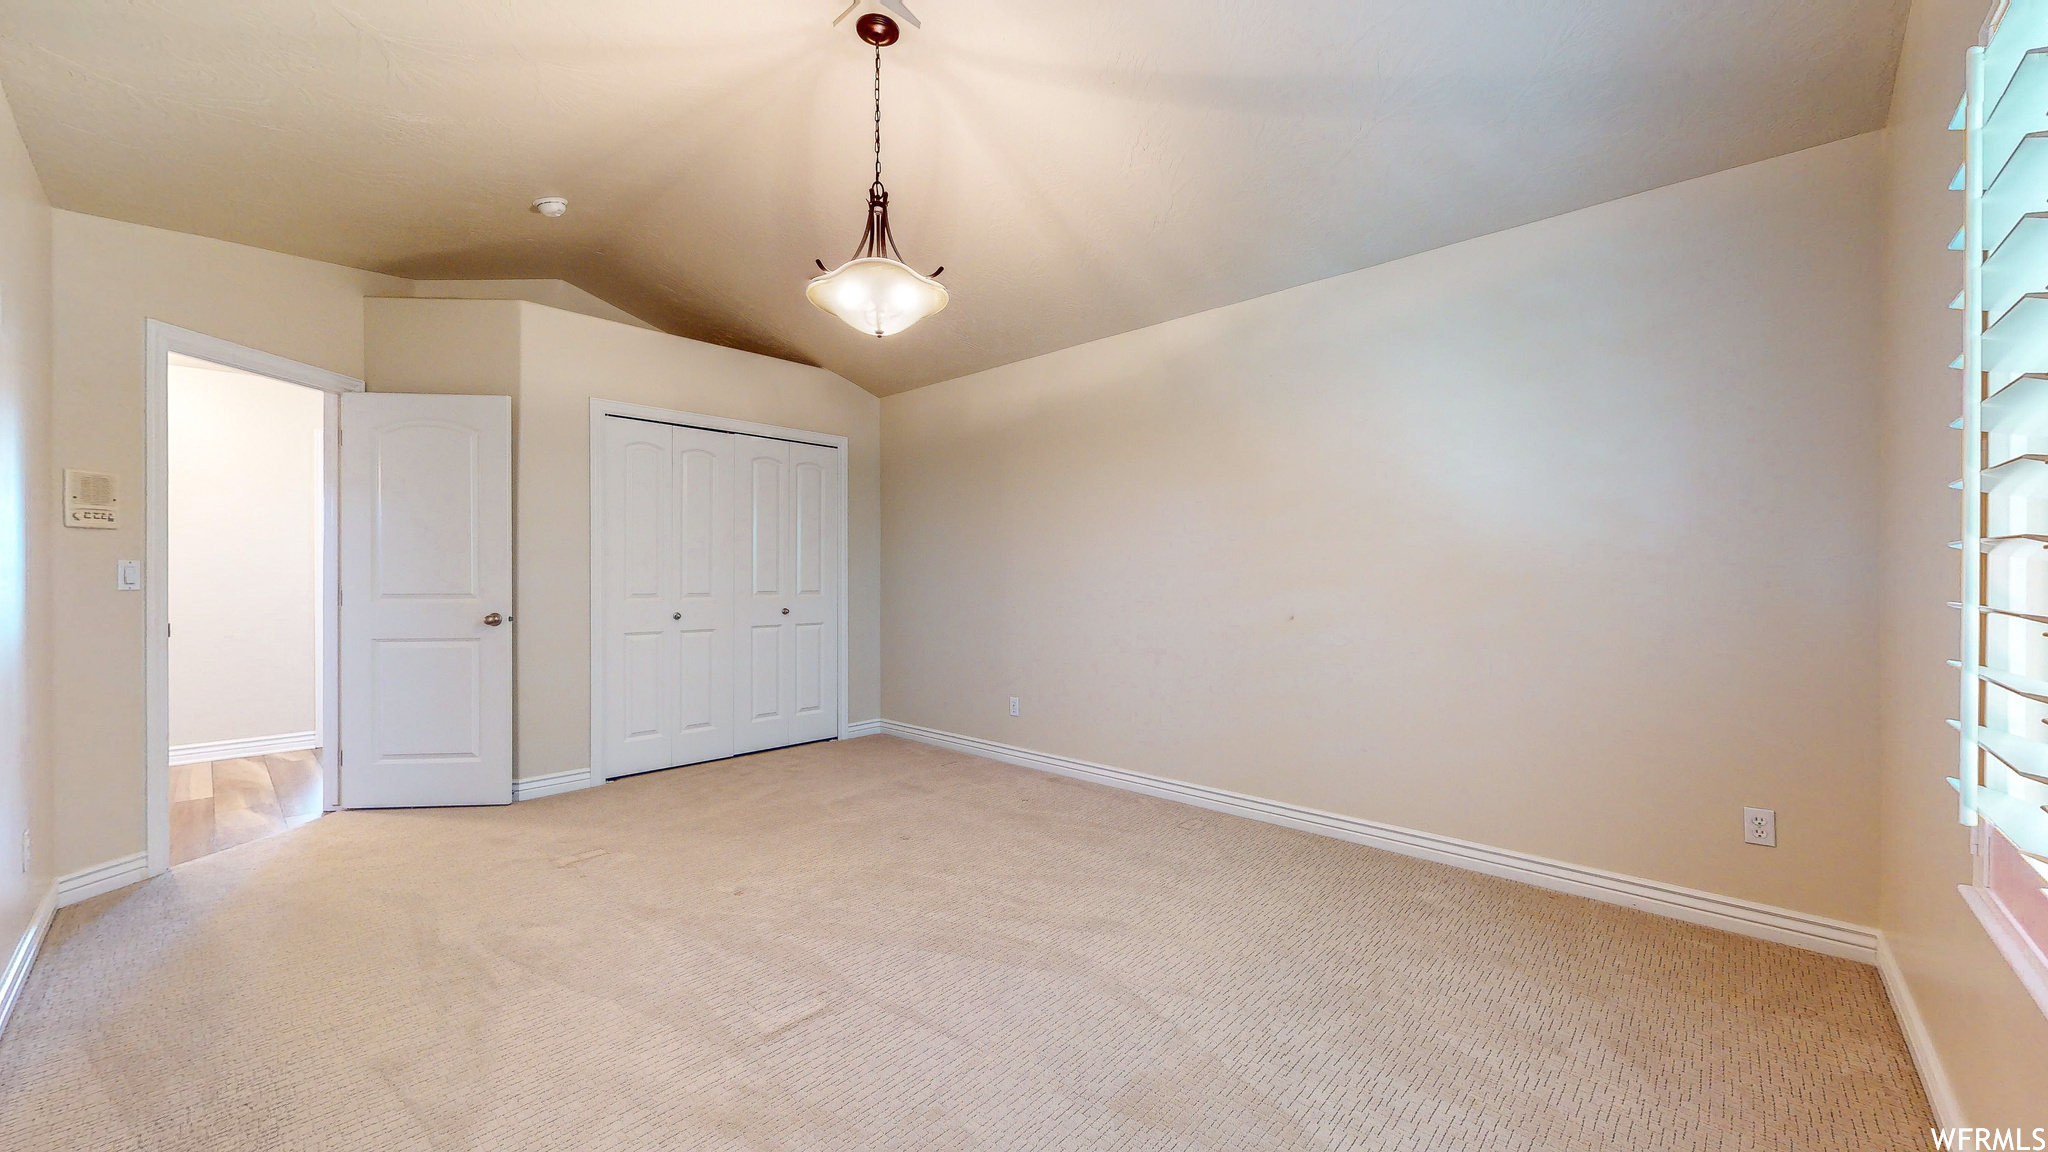 Unfurnished bedroom with lofted ceiling, a closet, and light colored carpet